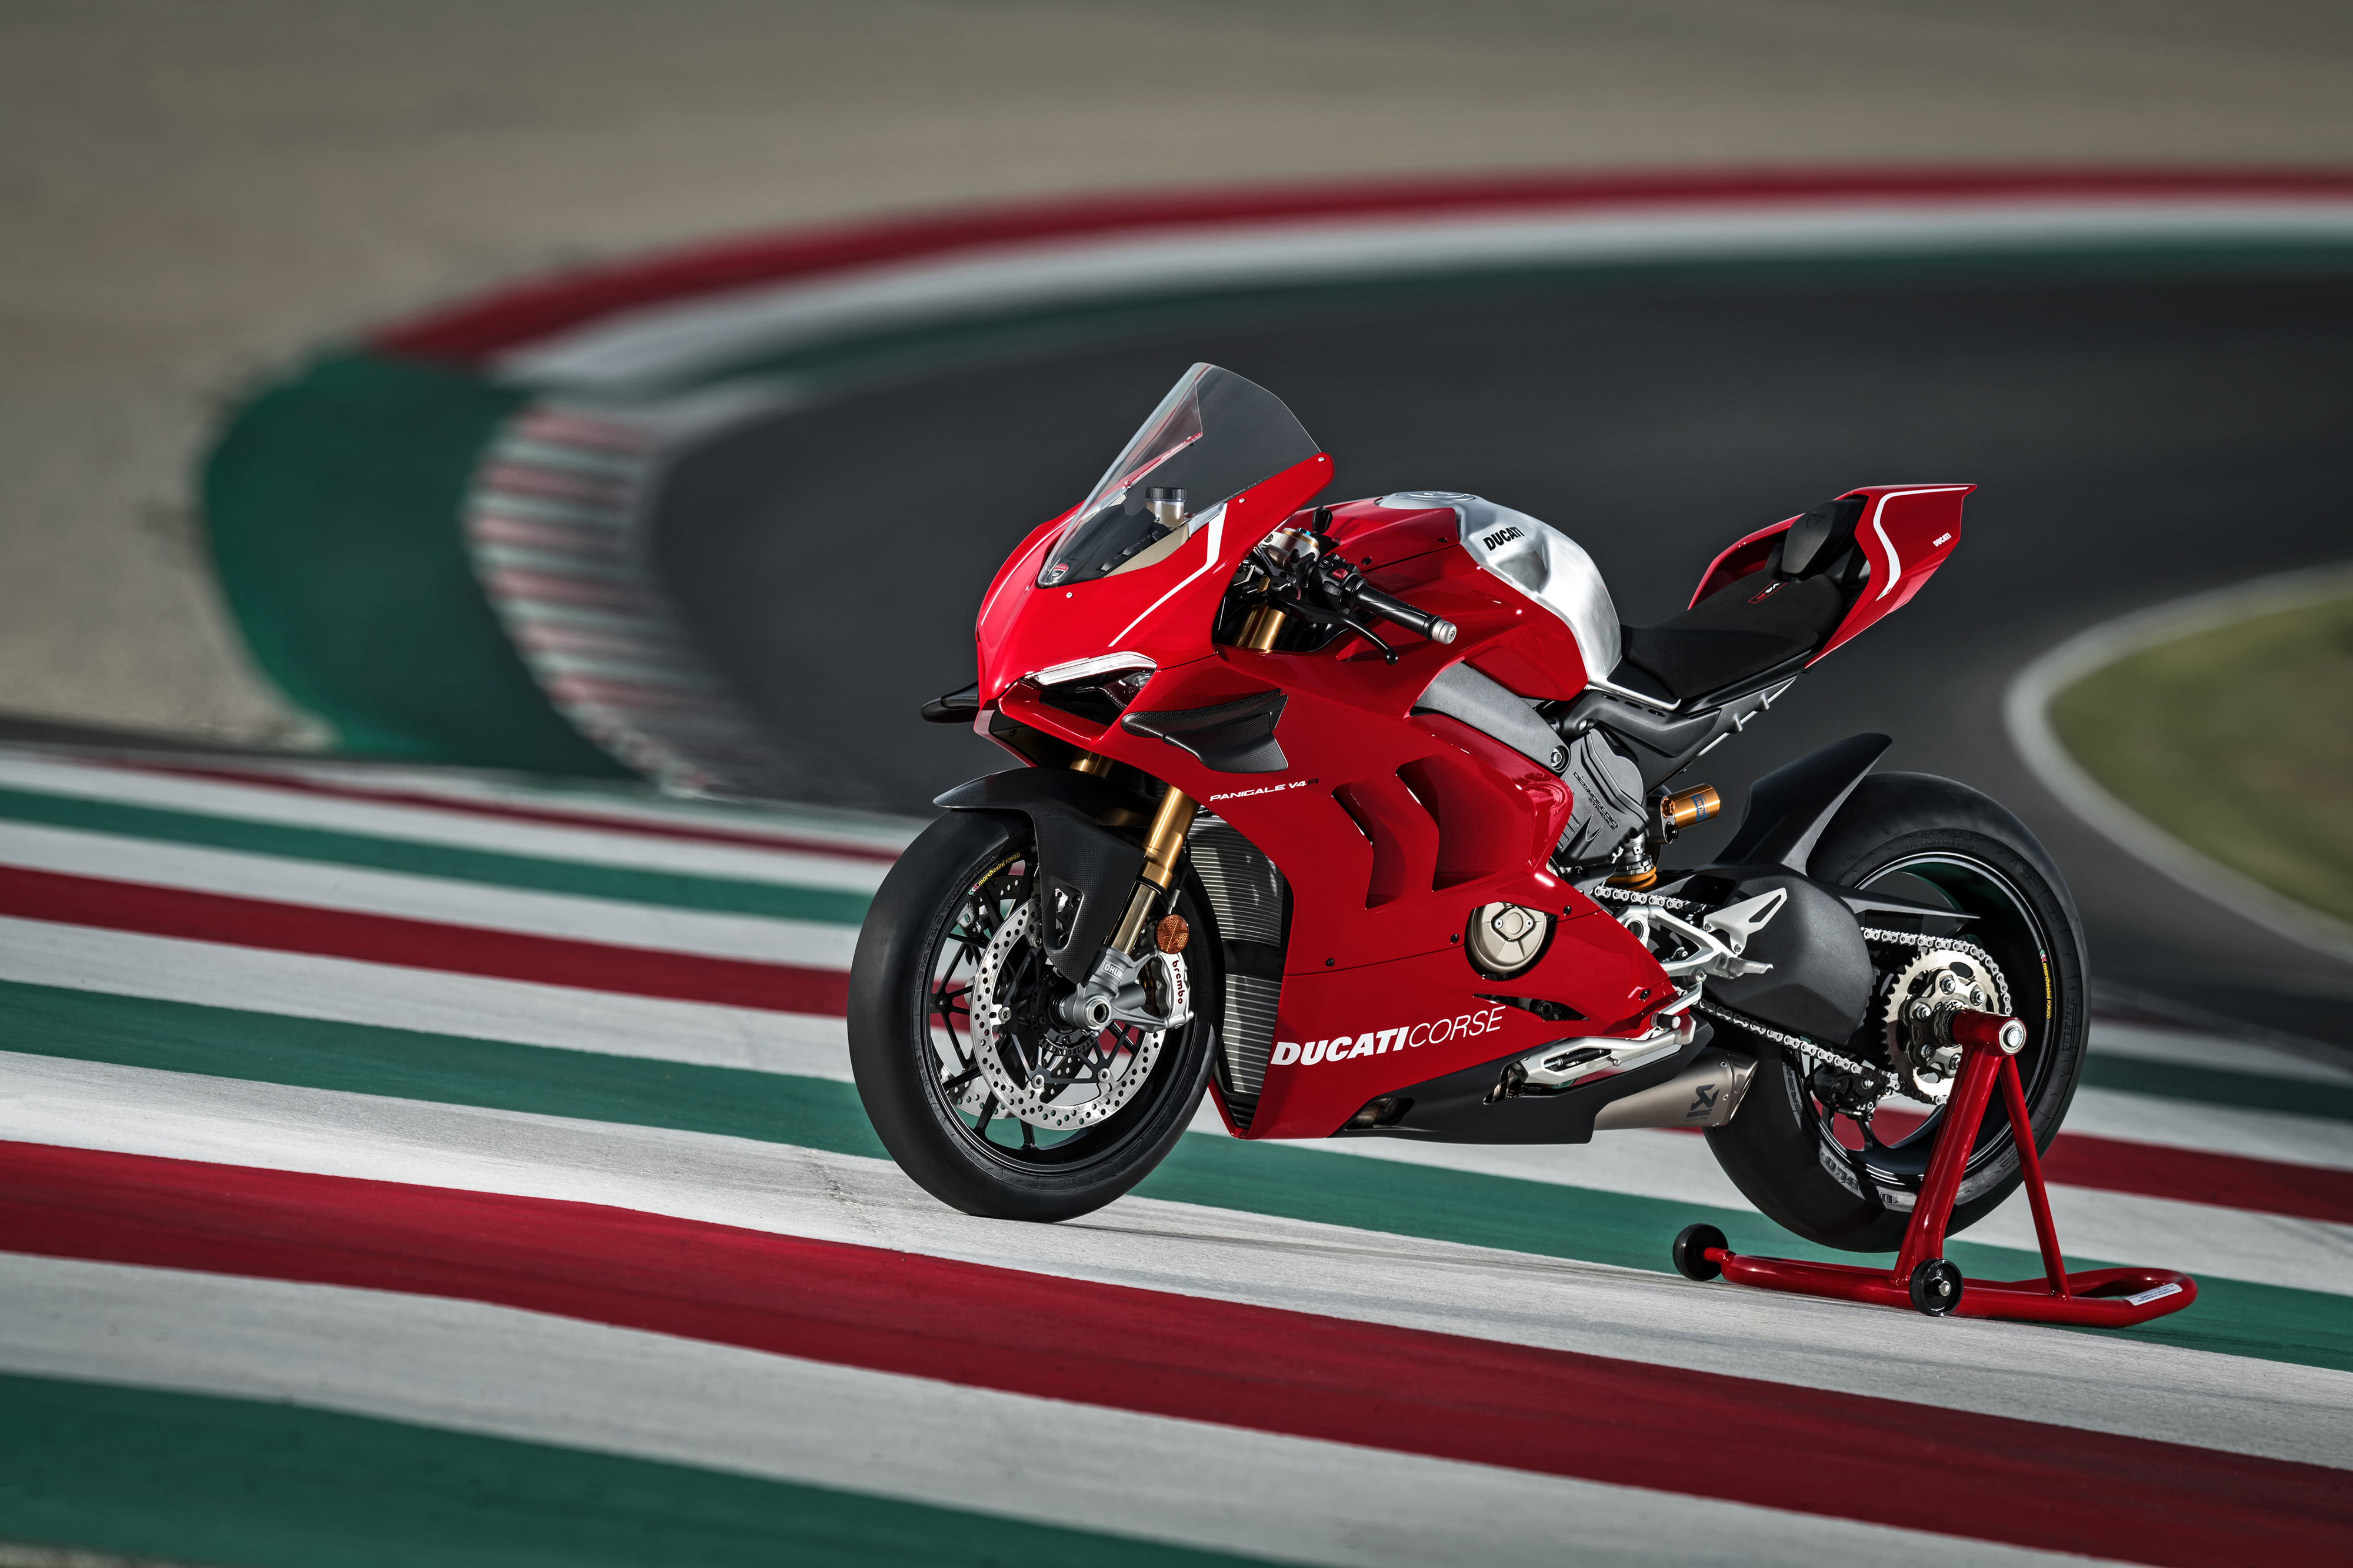 01_DUCATI-PANIGALE-V4-R-ACTION_UC69239_Mid.jpg